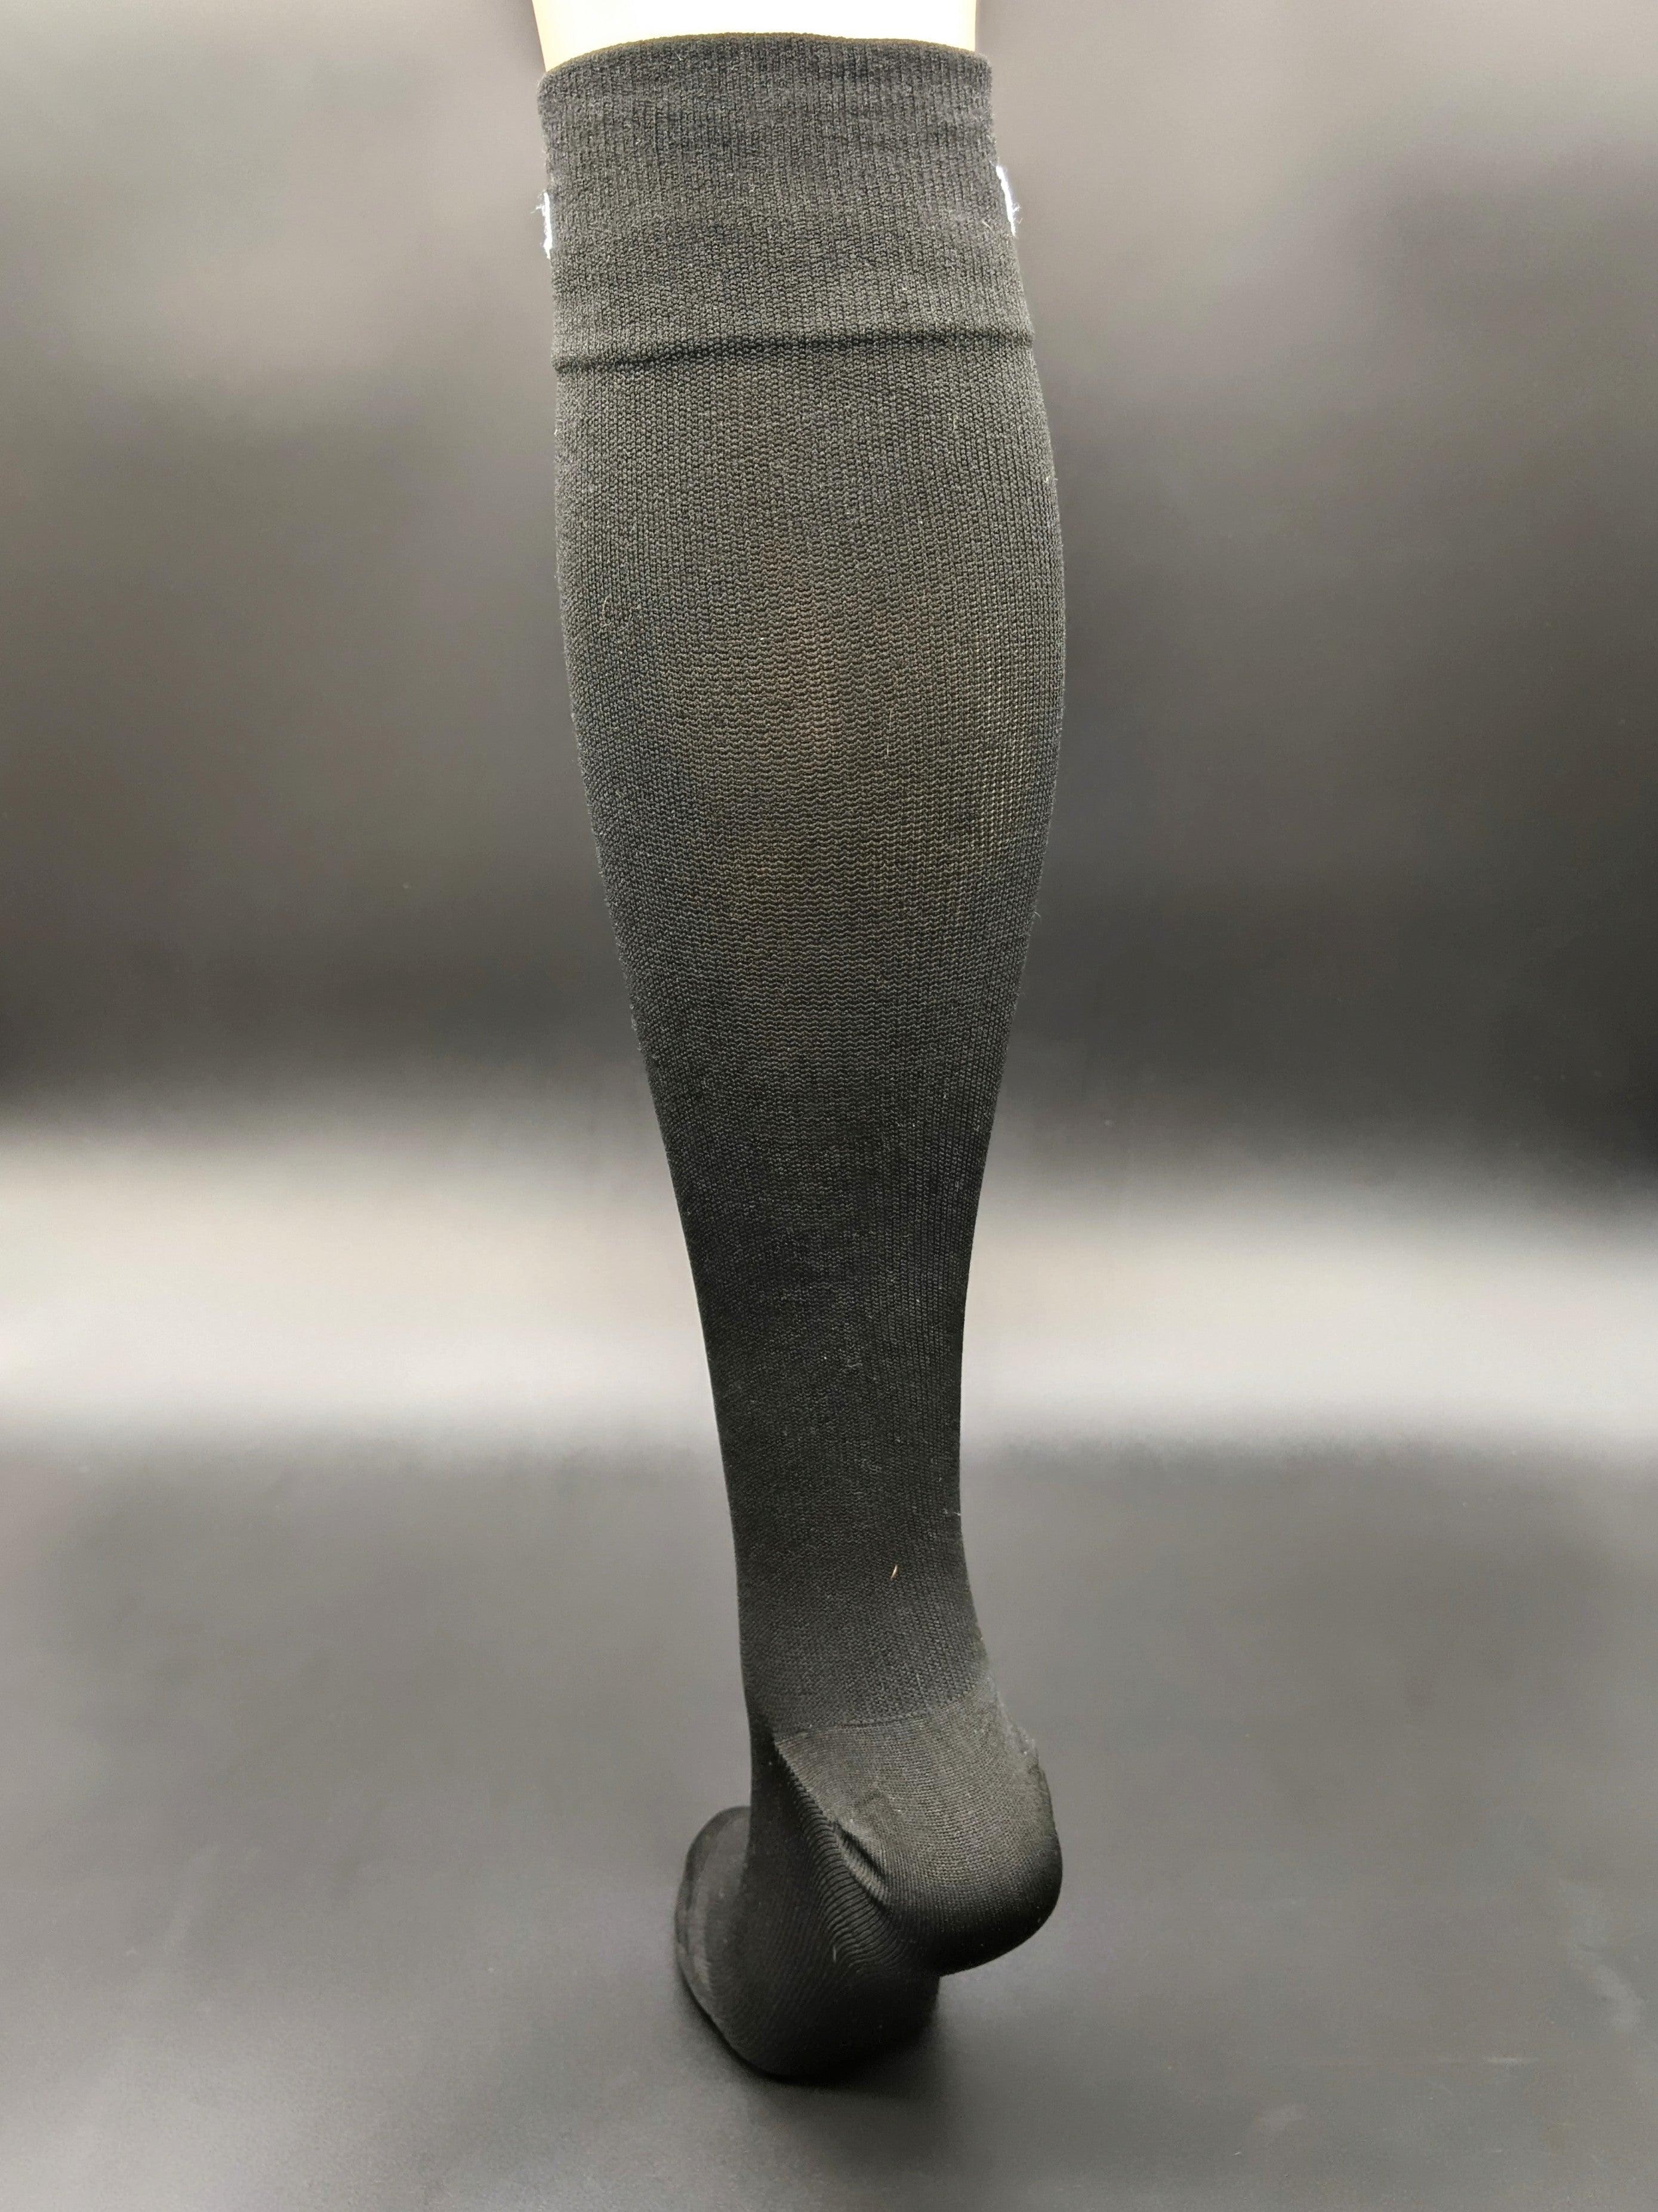 1PAIR Unisex Knee-High Medical Compression Stockings Varicose Veins Open  Toe Stockings Compression may help to reduce the appearance and painful  symptoms varicose veins in some people. Doctors often recommend  compressions